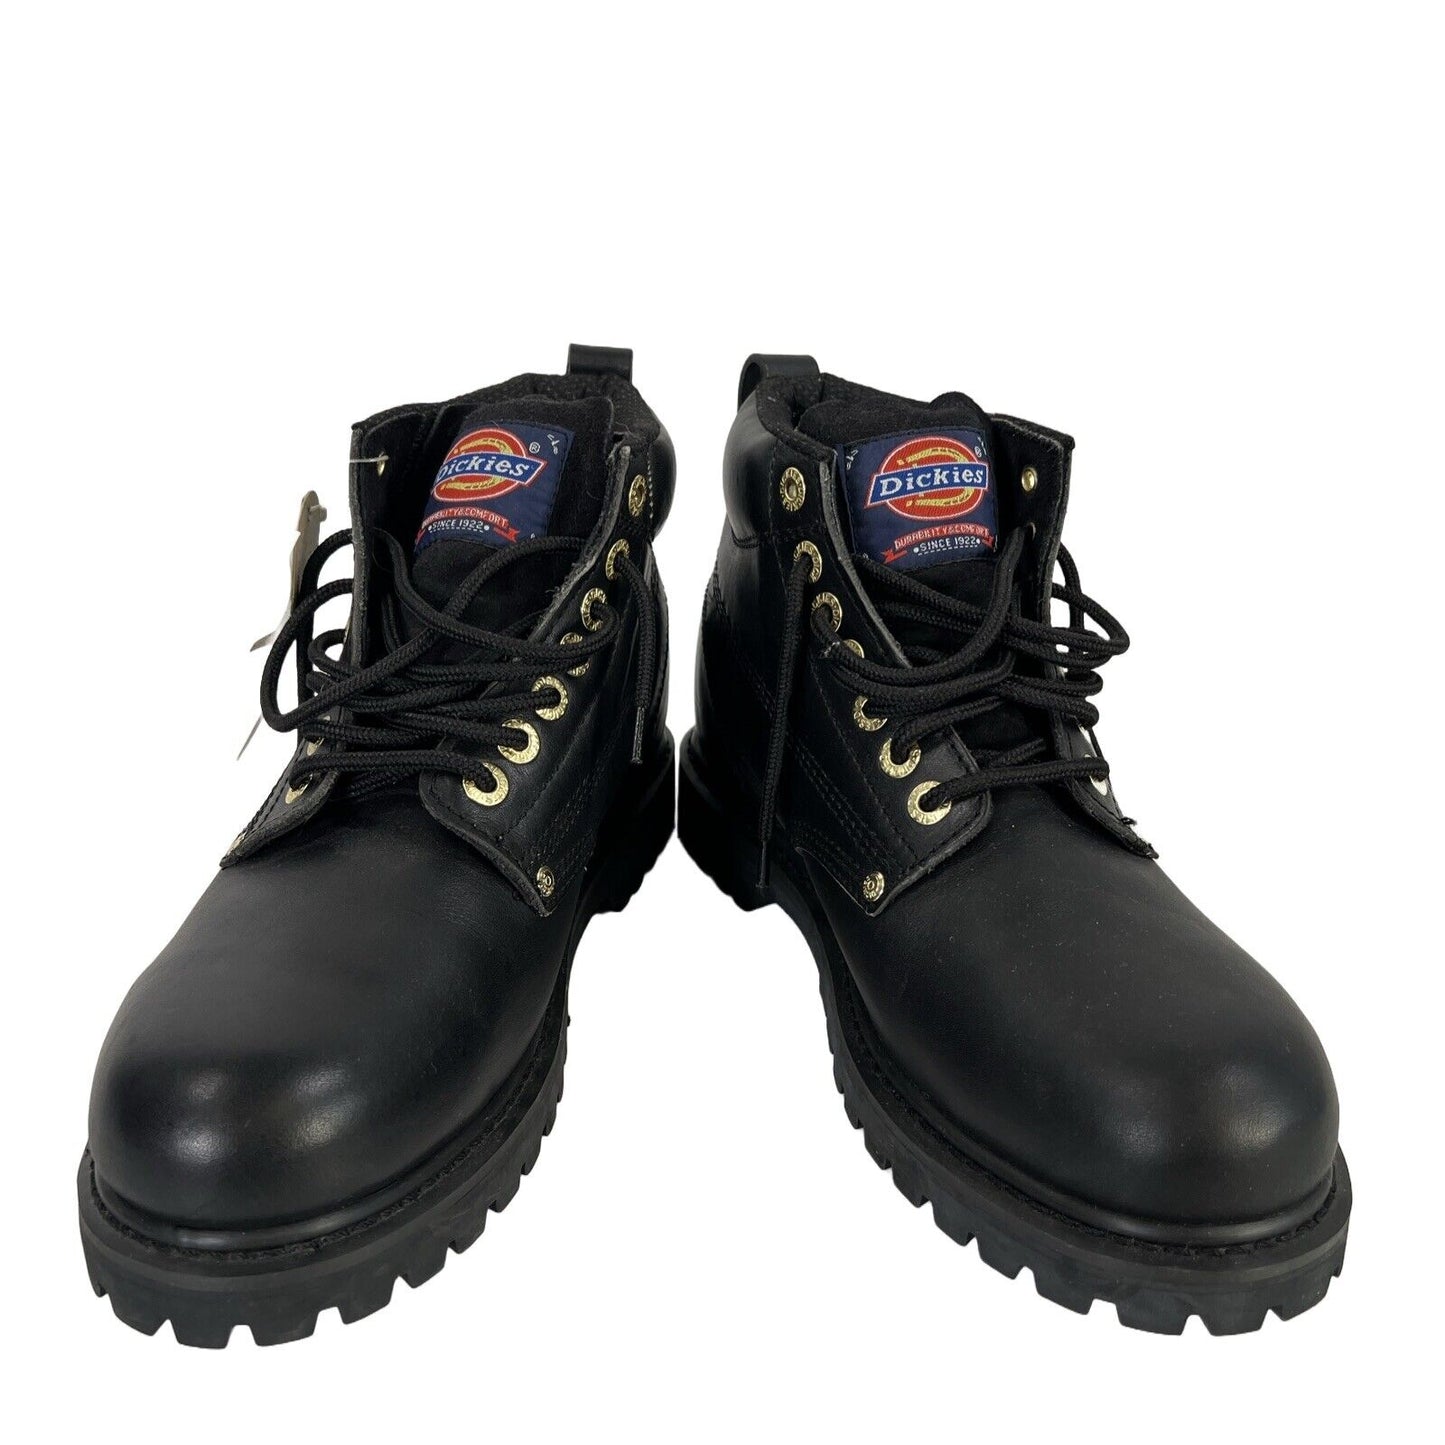 NEW Dickies Men's Black Leather Lace Up Steel Toe Work Boots - 8.5